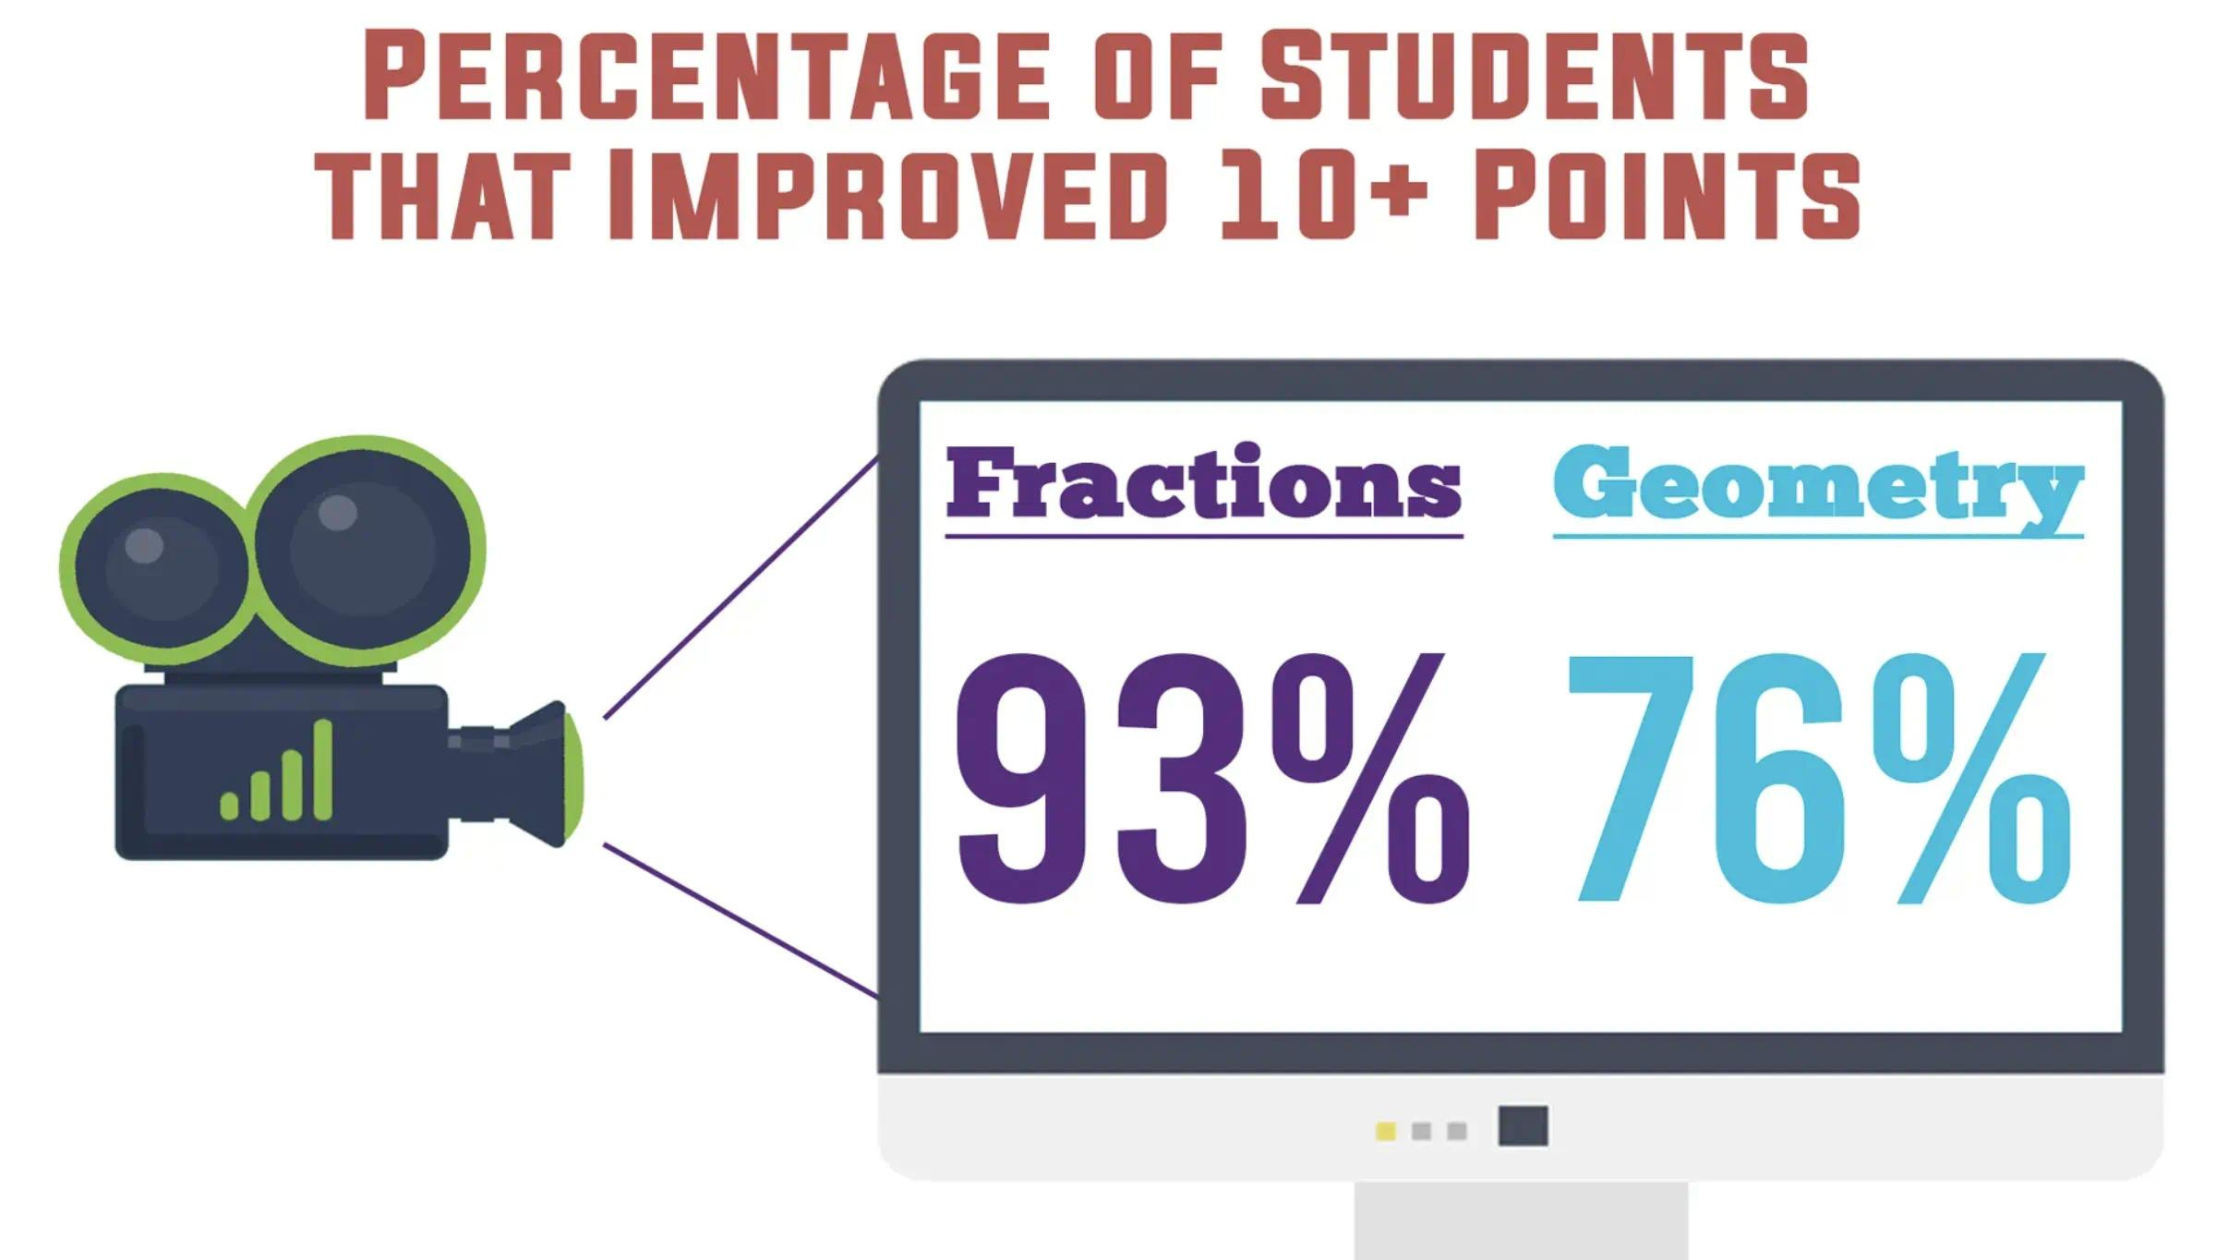 Percentage of students that improved